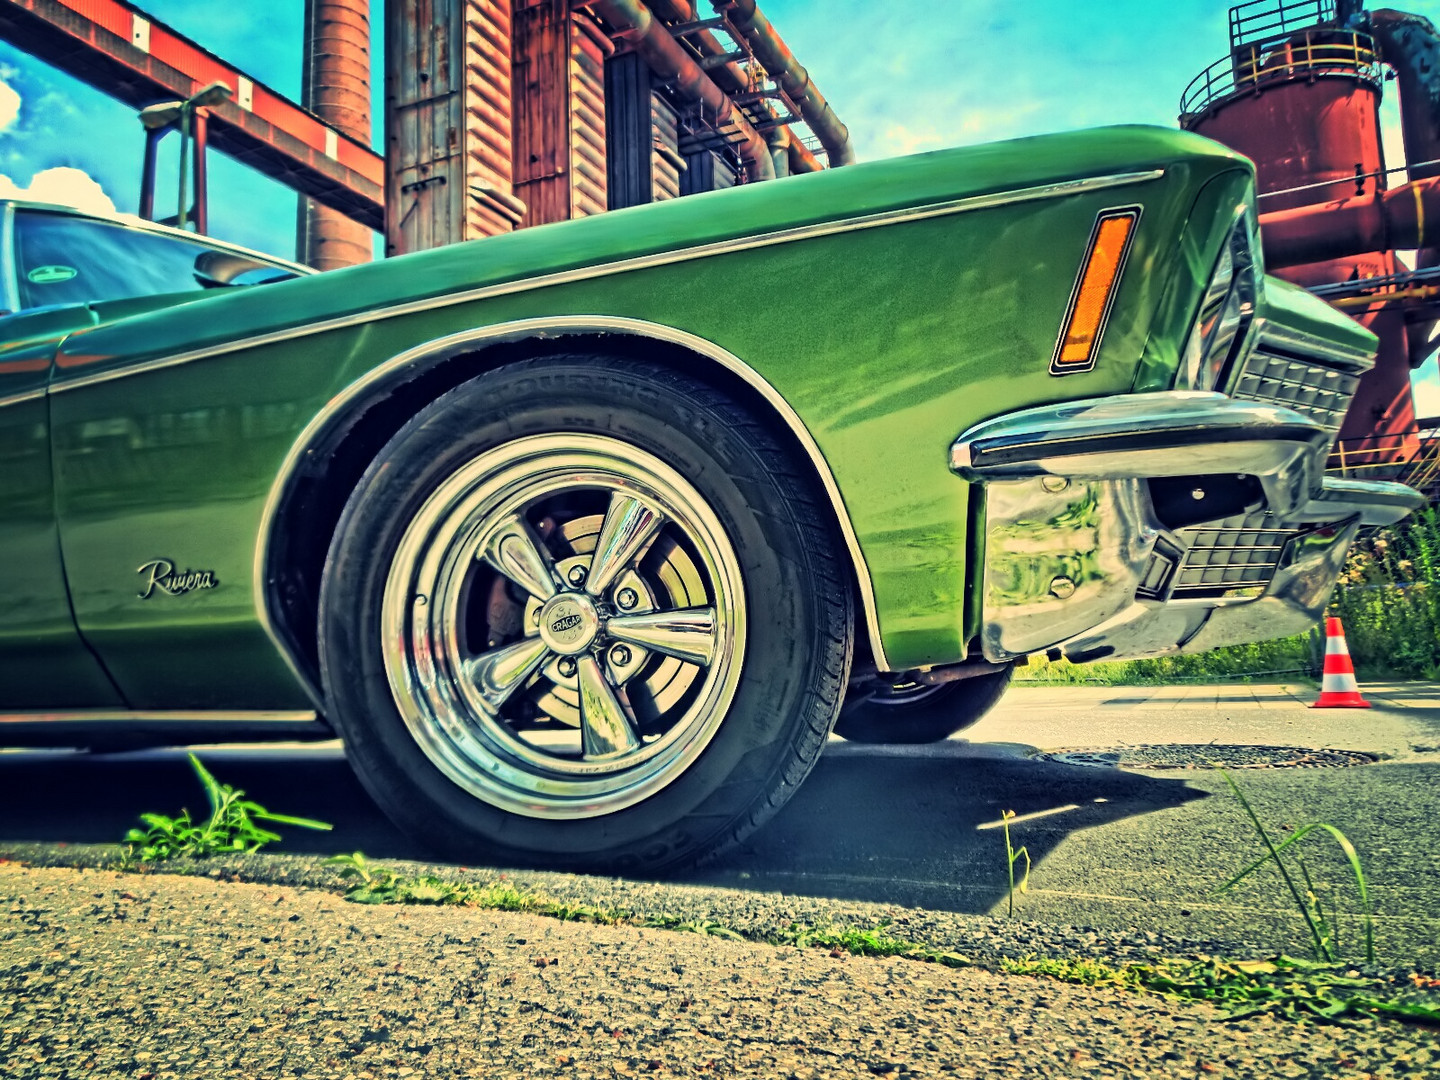 Buick Riviera HDR